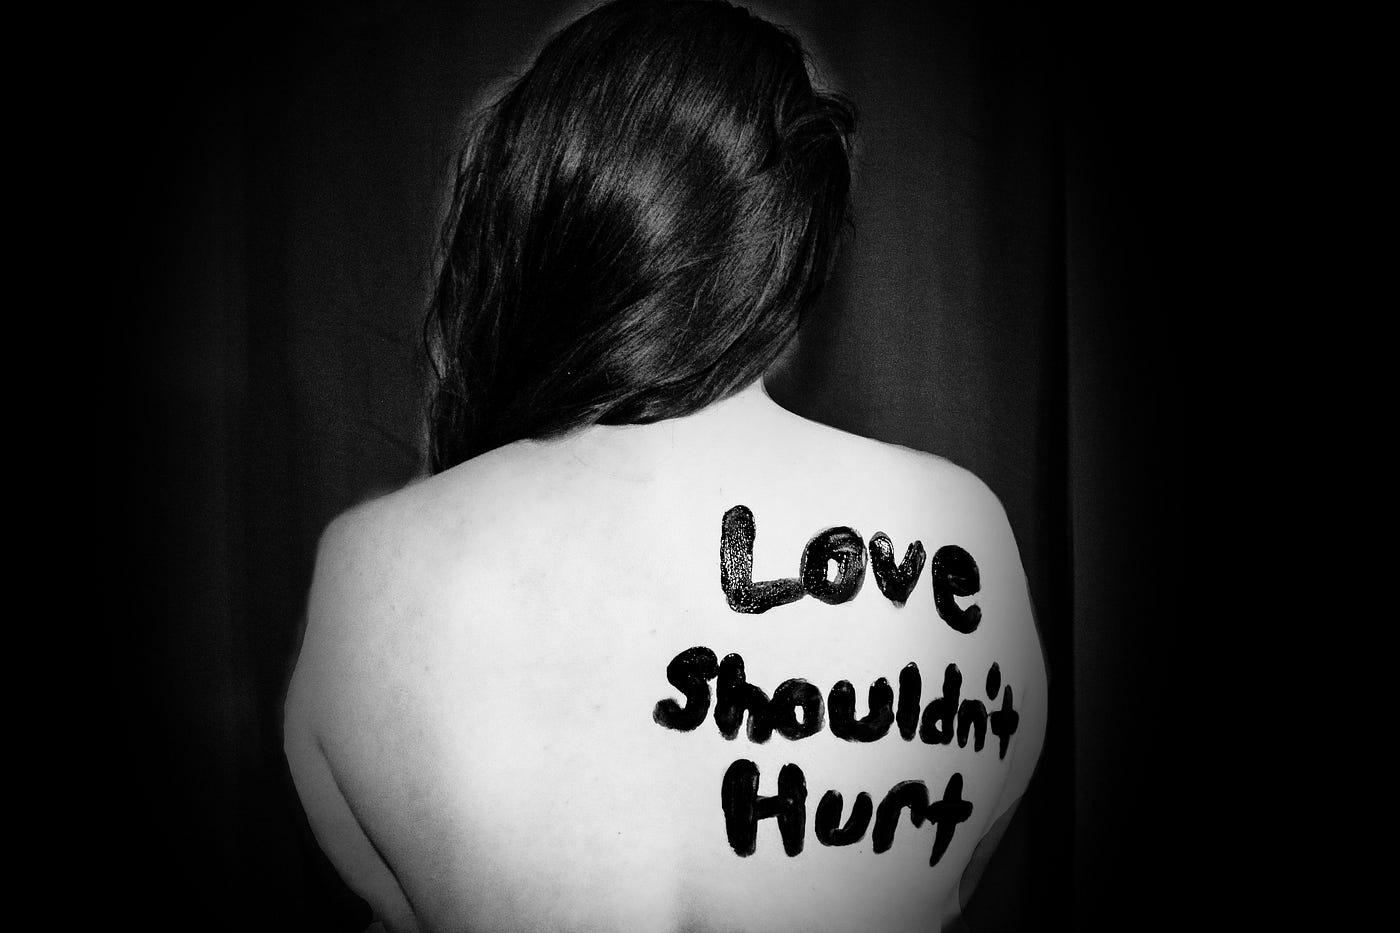 A naked girl with long dark hair is sat in darkness. ‘Love shouldn’t hurt’ is written on her back.